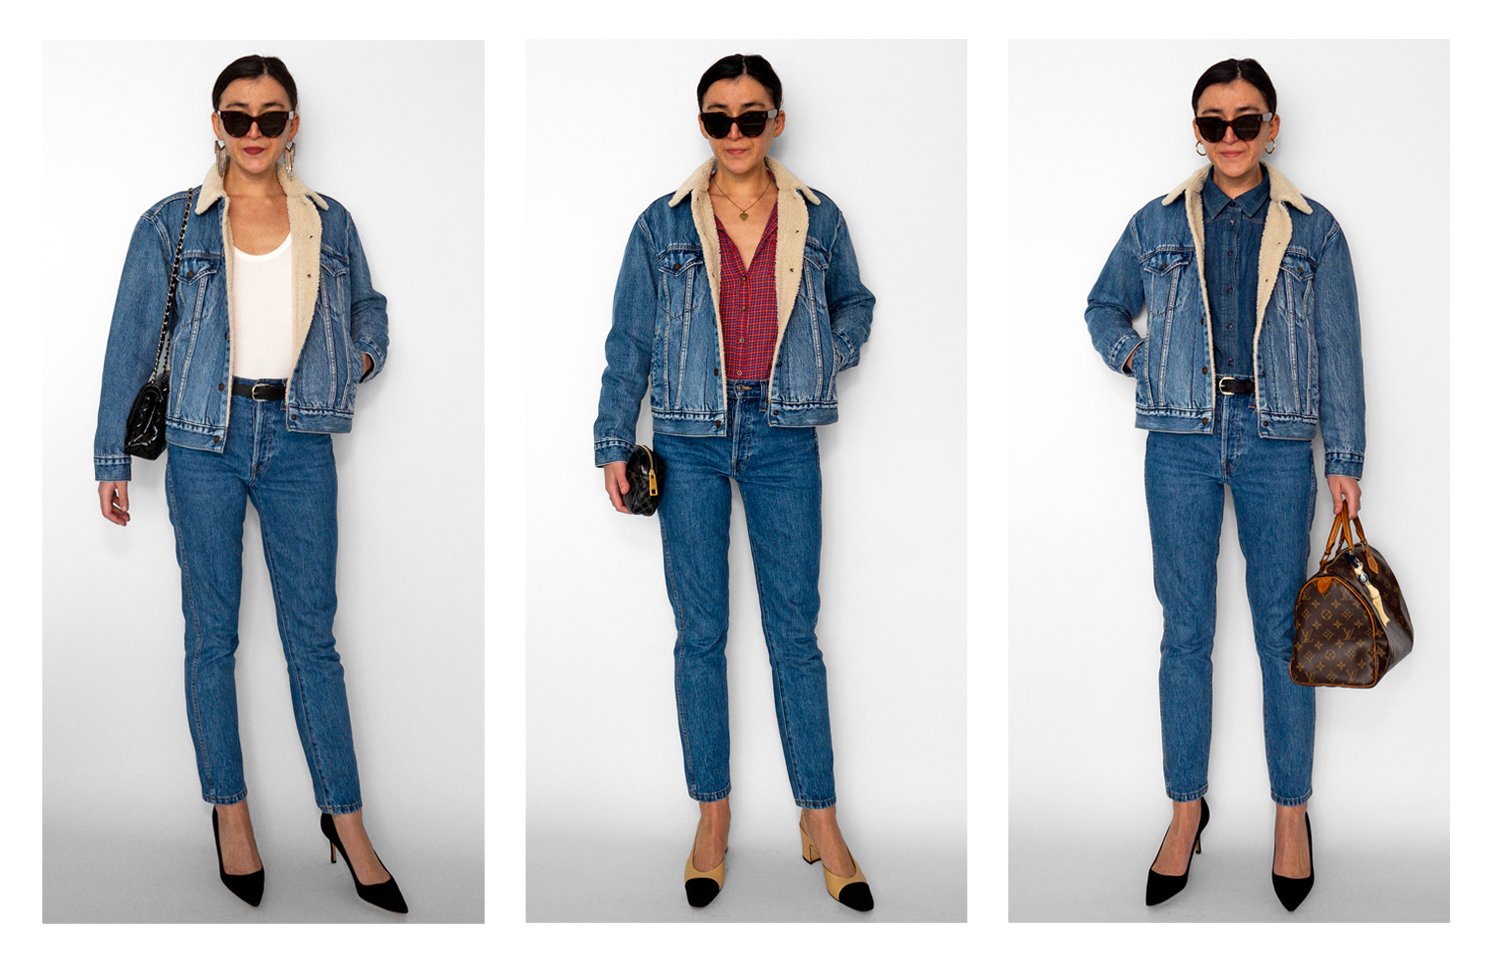 shearling denim jacket with blue jeans outfits